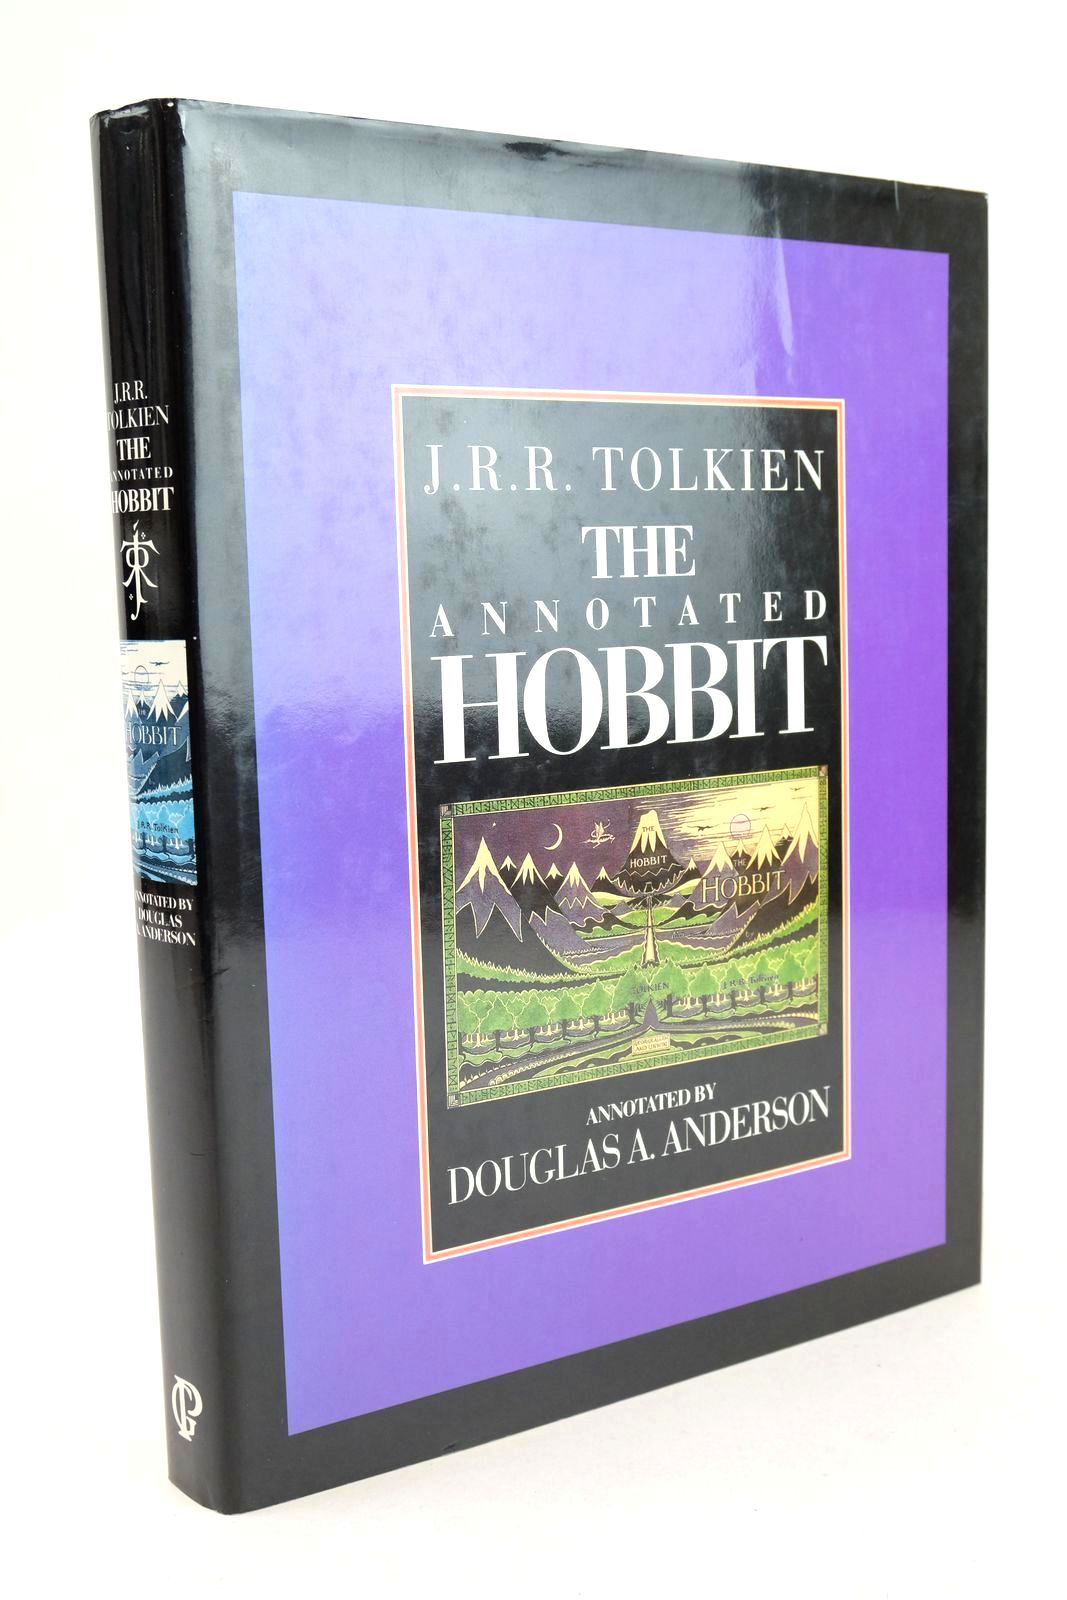 Photo of THE ANNOTATED HOBBIT written by Tolkien, J.R.R. Anderson, Douglas A. illustrated by Tolkien, J.R.R. published by Guild Publishing (STOCK CODE: 1325875)  for sale by Stella & Rose's Books